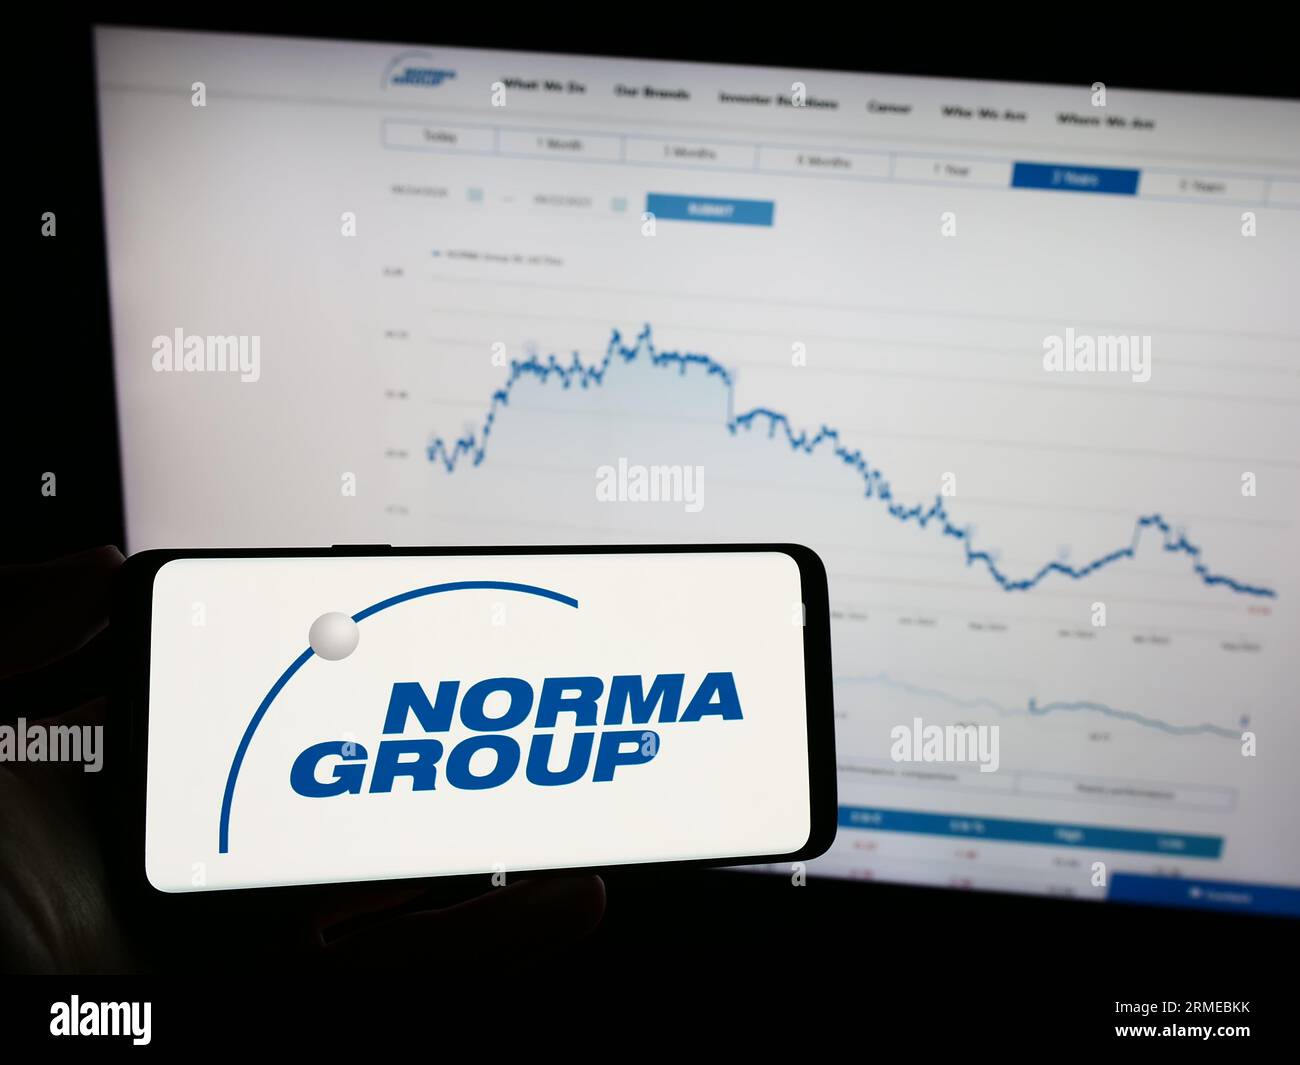 Person holding mobile phone with logo of German manufacturing company Norma Group SE on screen in front of web page. Focus on phone display. Stock Photo